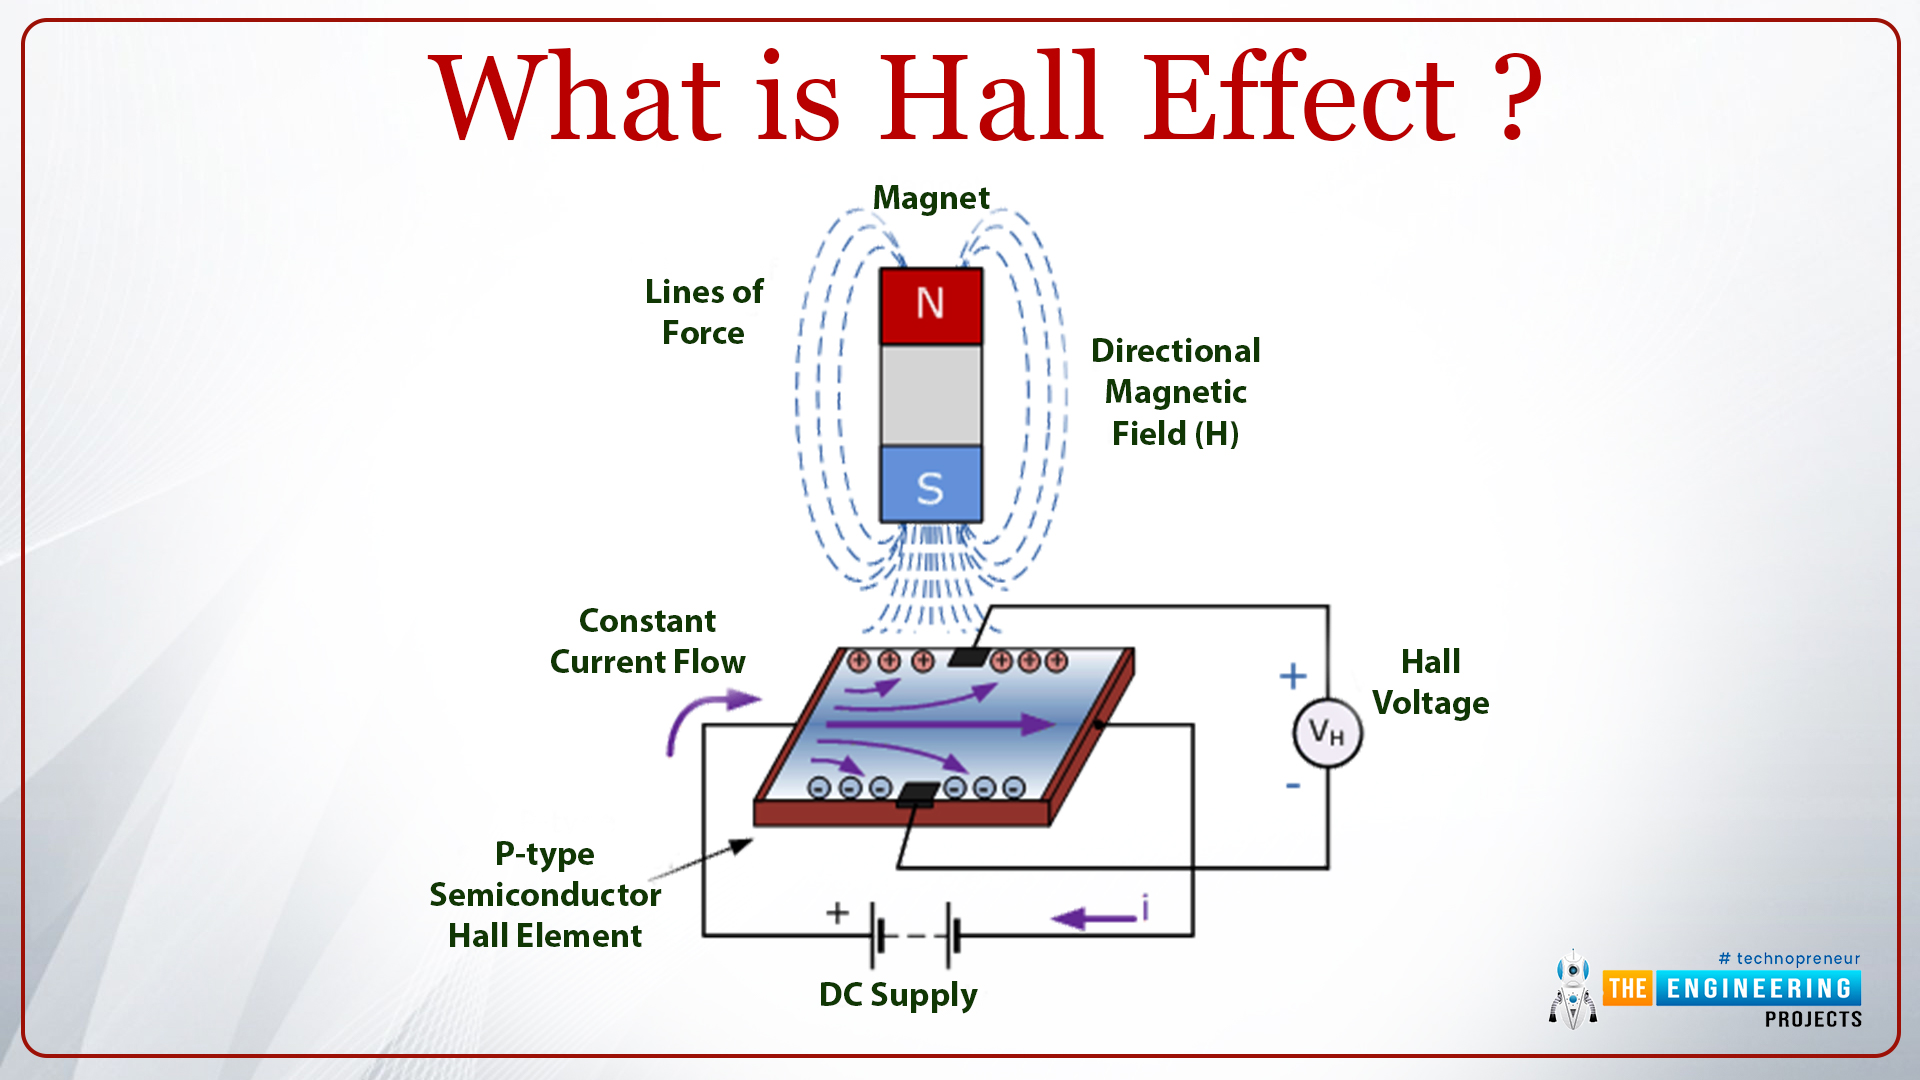 What is hall effect, How does hall effect sensors work, Applications of hall effect sensors, Hall Effect sensor in ESP32, Programming ESP32 Hall Effect Sensor using Arduino IDE, Code description, Setup(), Loop(), Testing, Serial plotter, Serial monitor